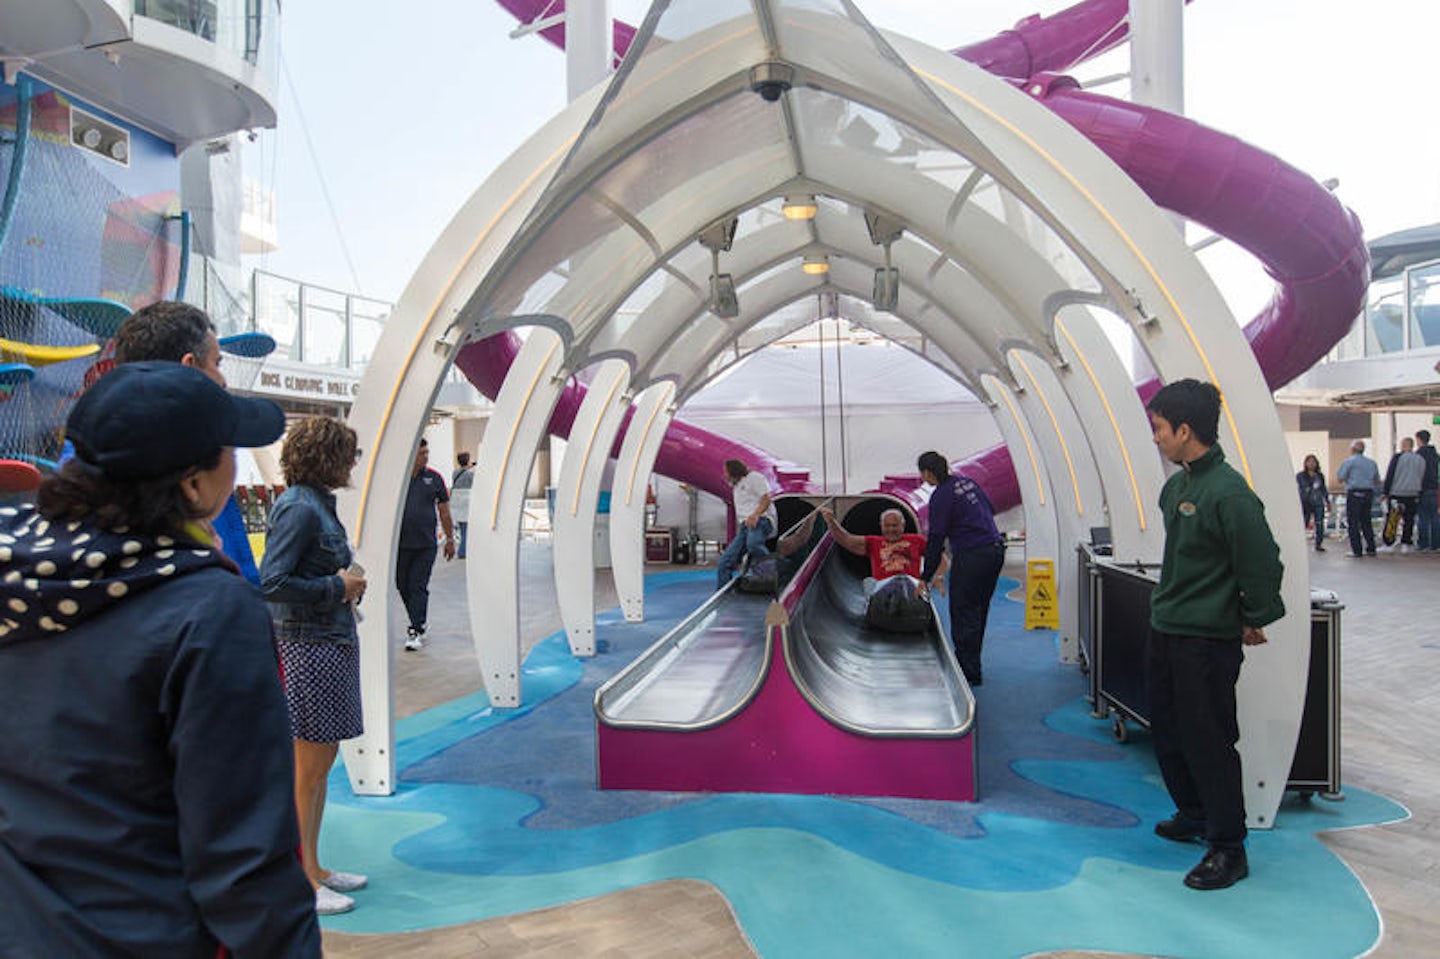 The Ultimate Abyss on Harmony of the Seas